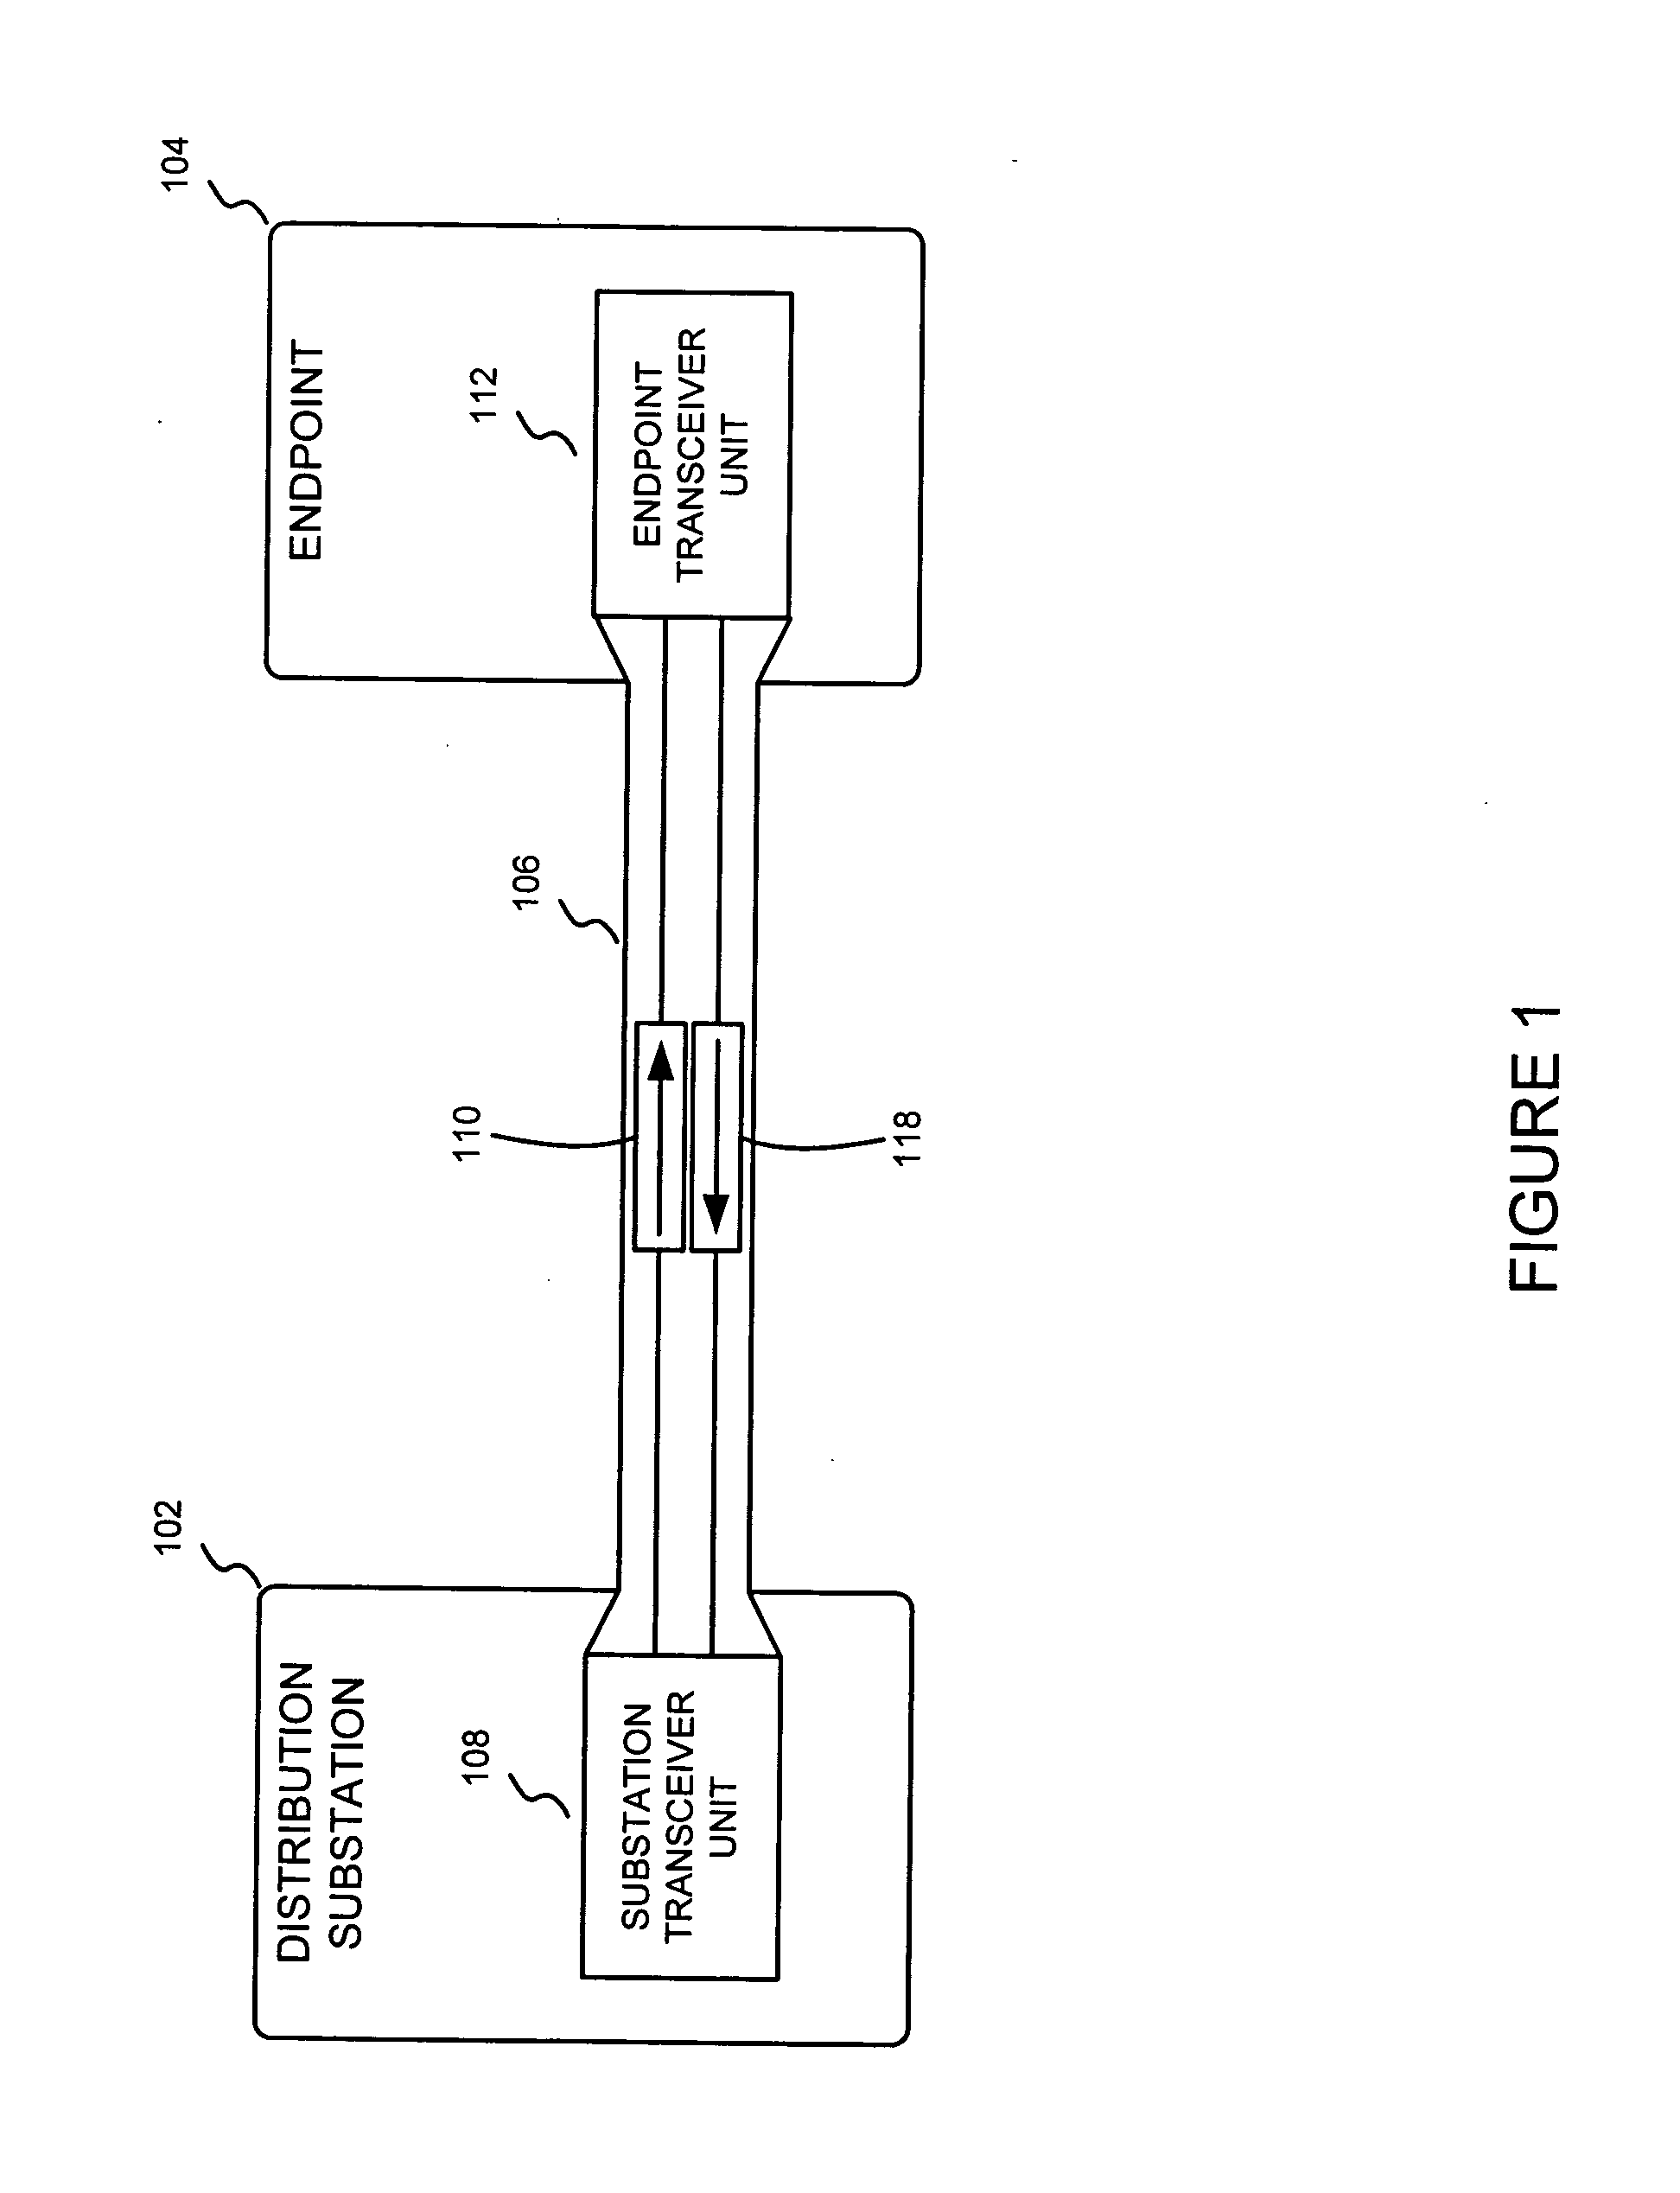 Endpoint event processing system